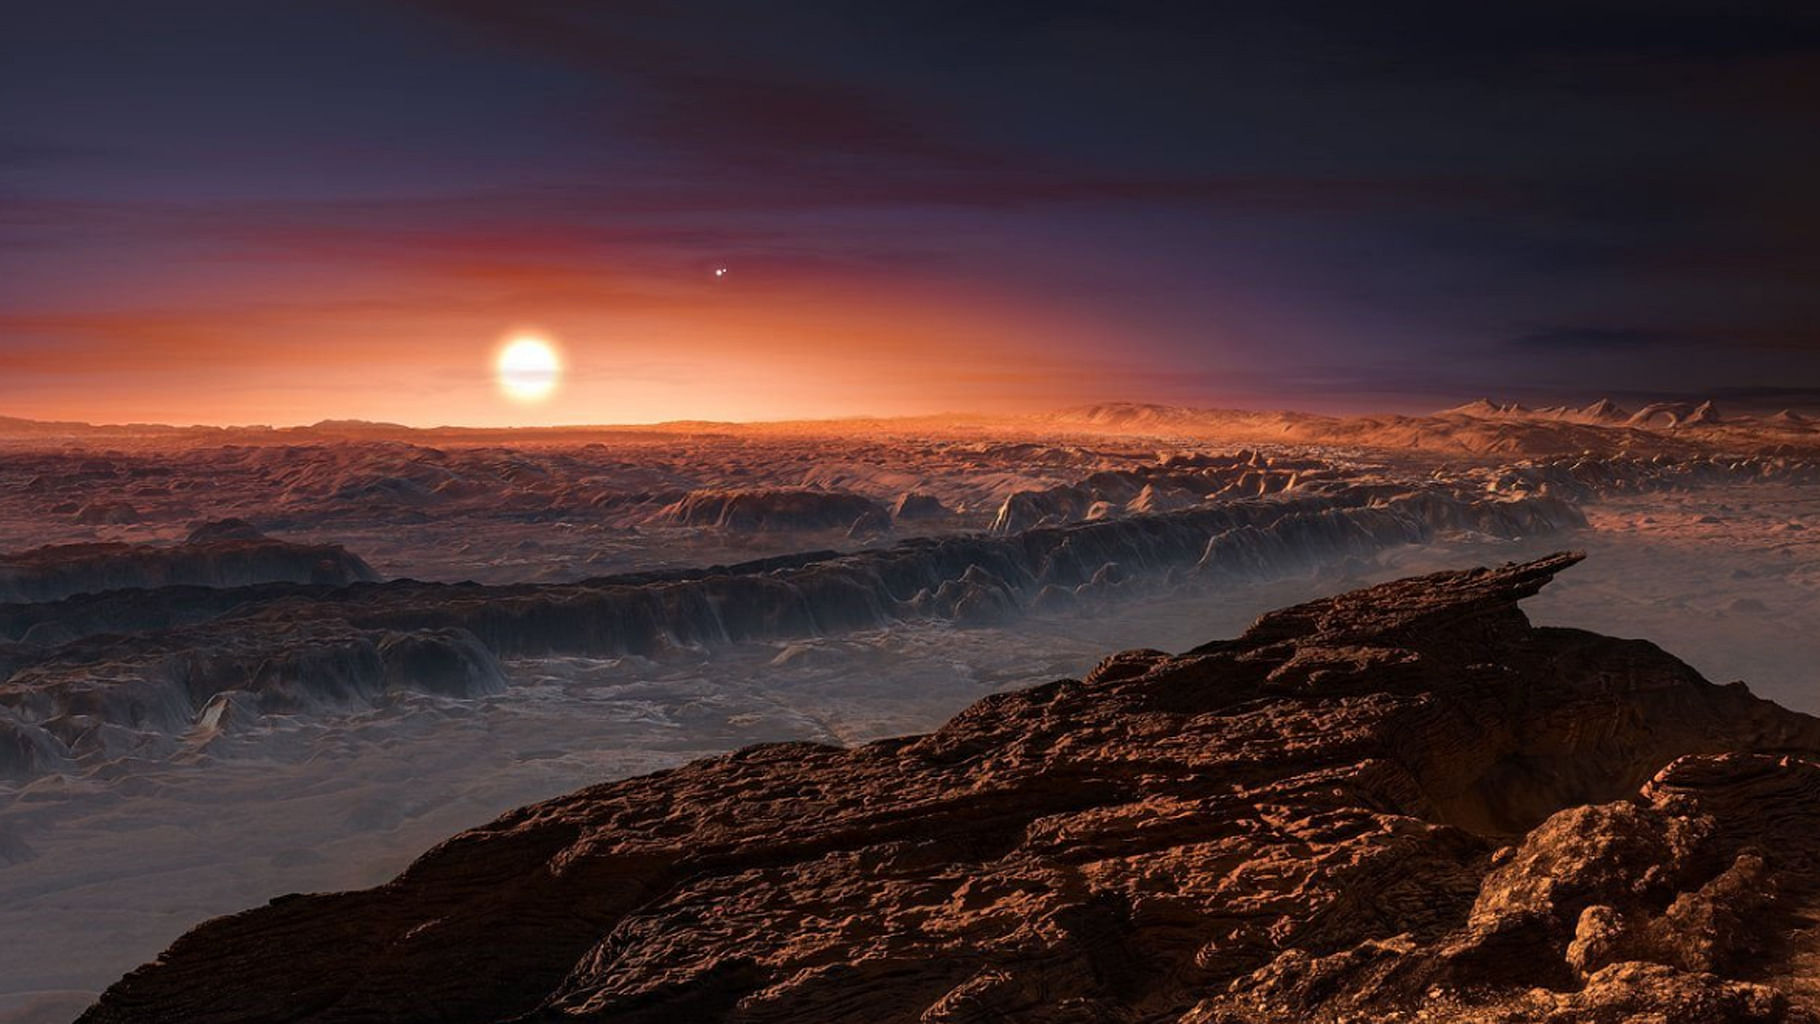 Scientists have discovered a planet that appears to be similar to Earth circling the star closest to the sun. (Photo Courtesy: <a href="https://twitter.com/SPACEdotcom/status/768508768078397440">Twitter/@Space.com</a>)